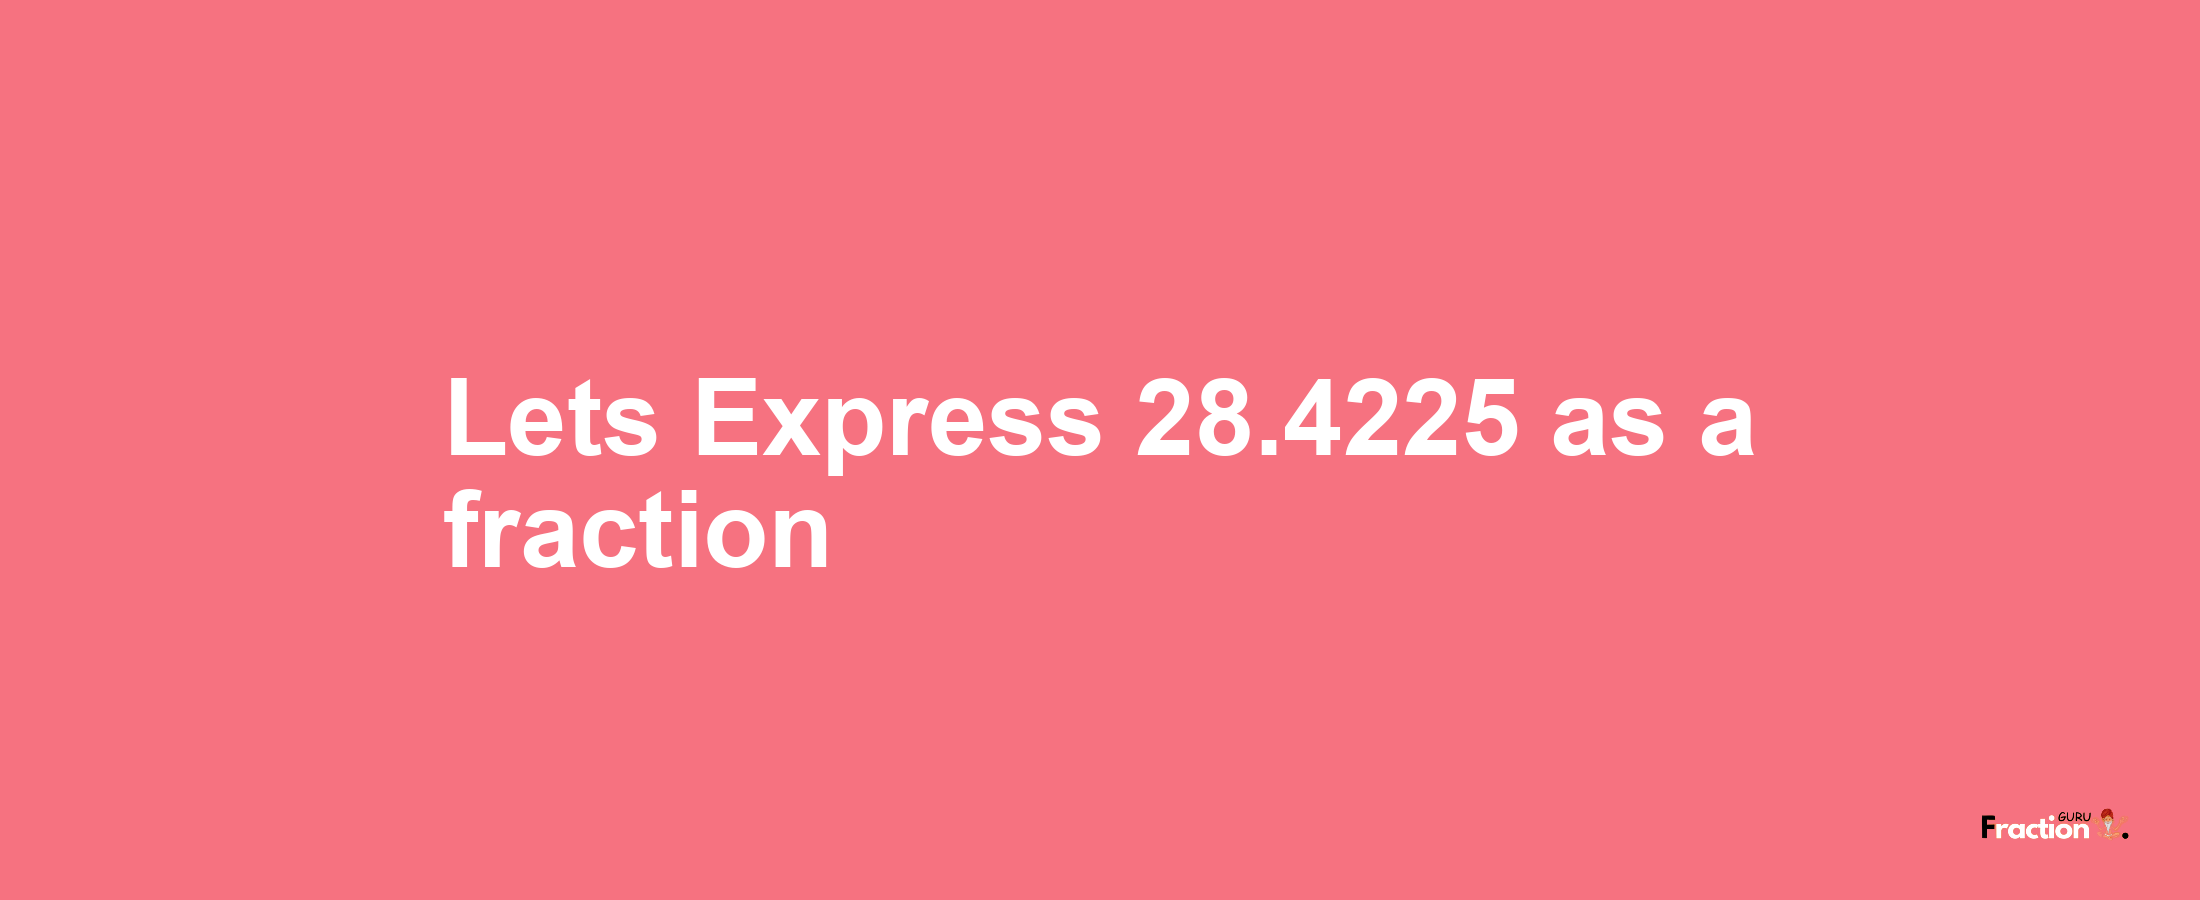 Lets Express 28.4225 as afraction